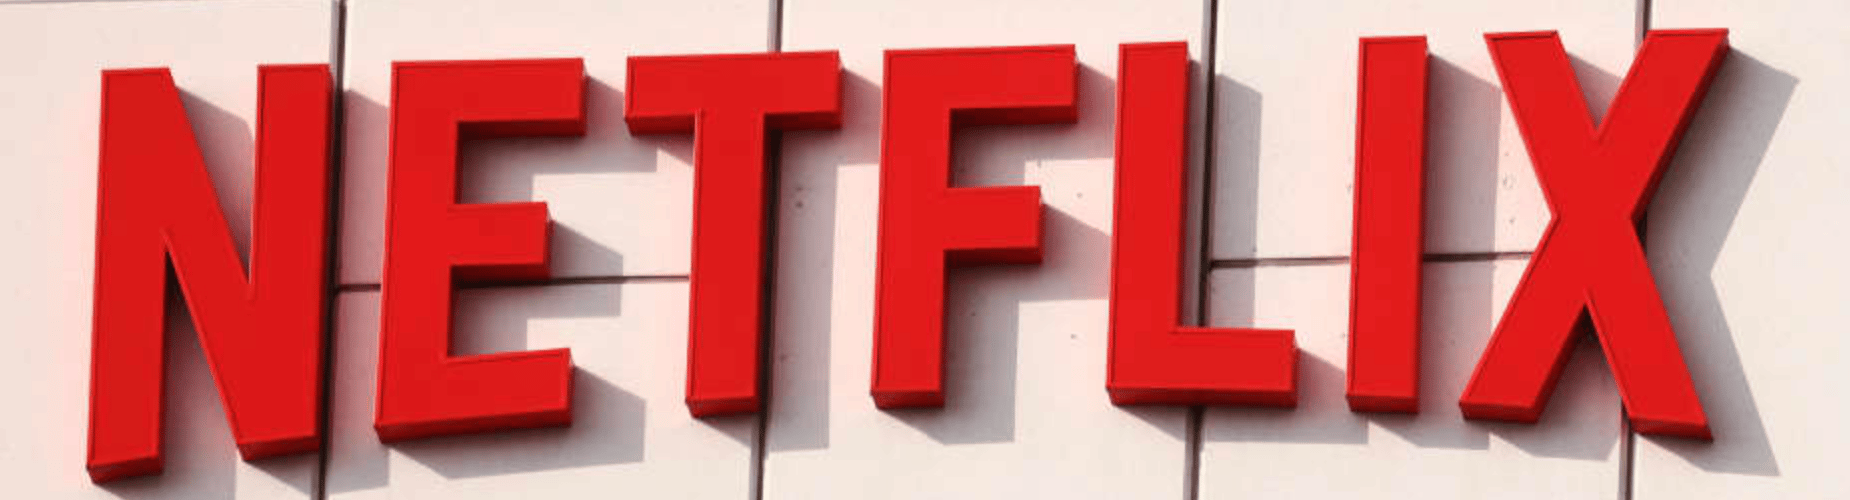 The Complete History of the Netflix Logo